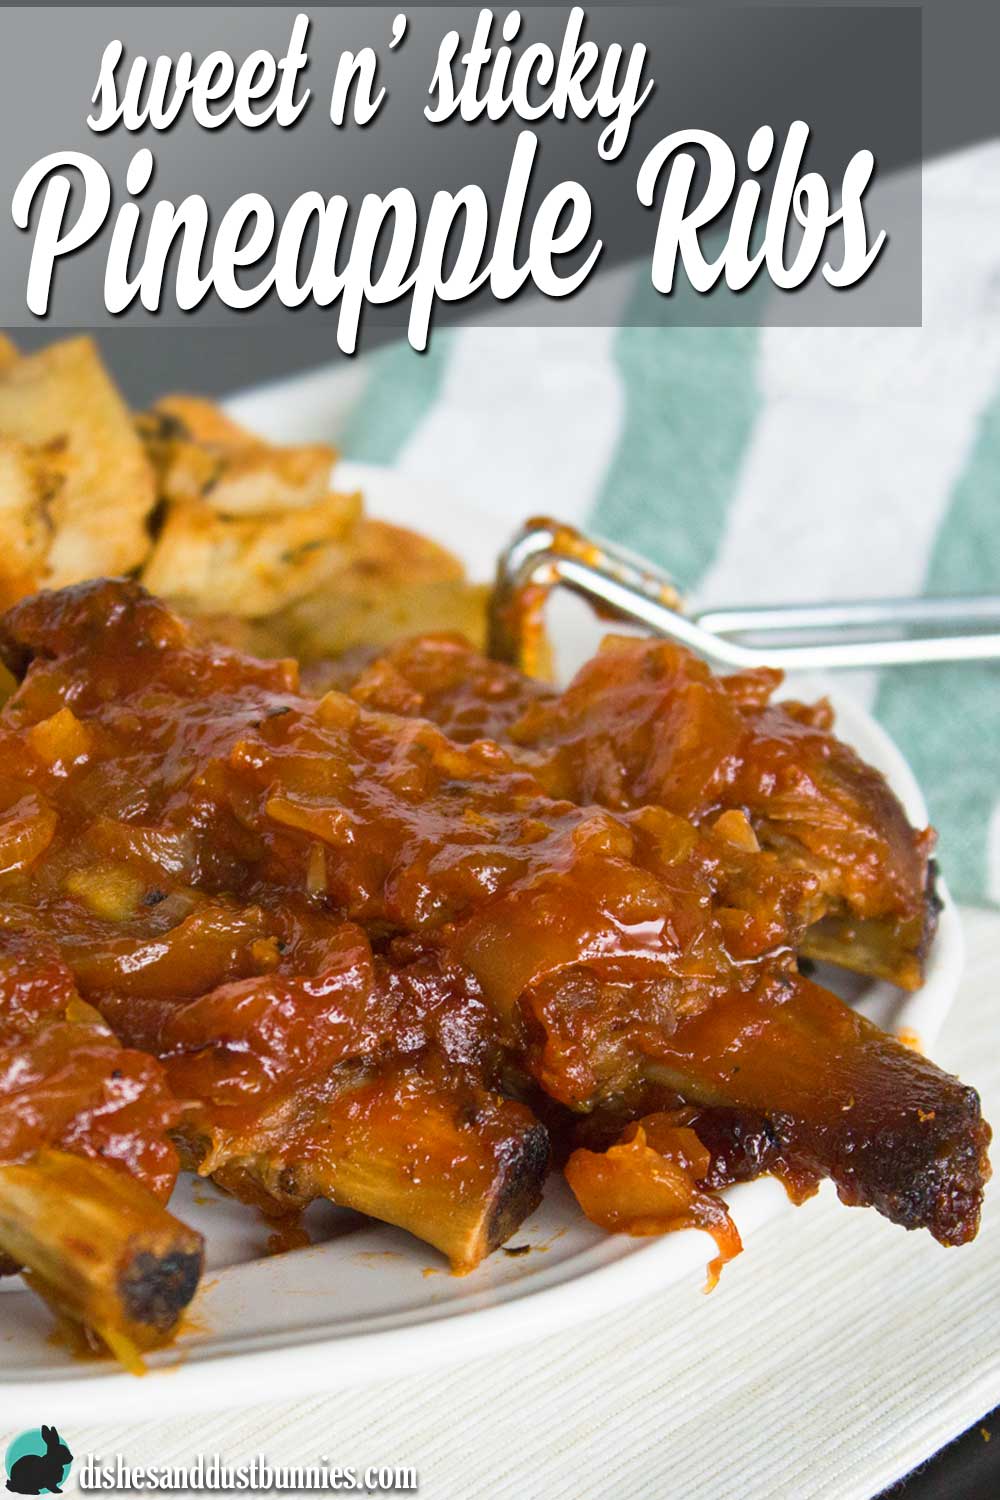 Sweet and Sticky Pineapple Ribs from dishesanddustbunnies.com